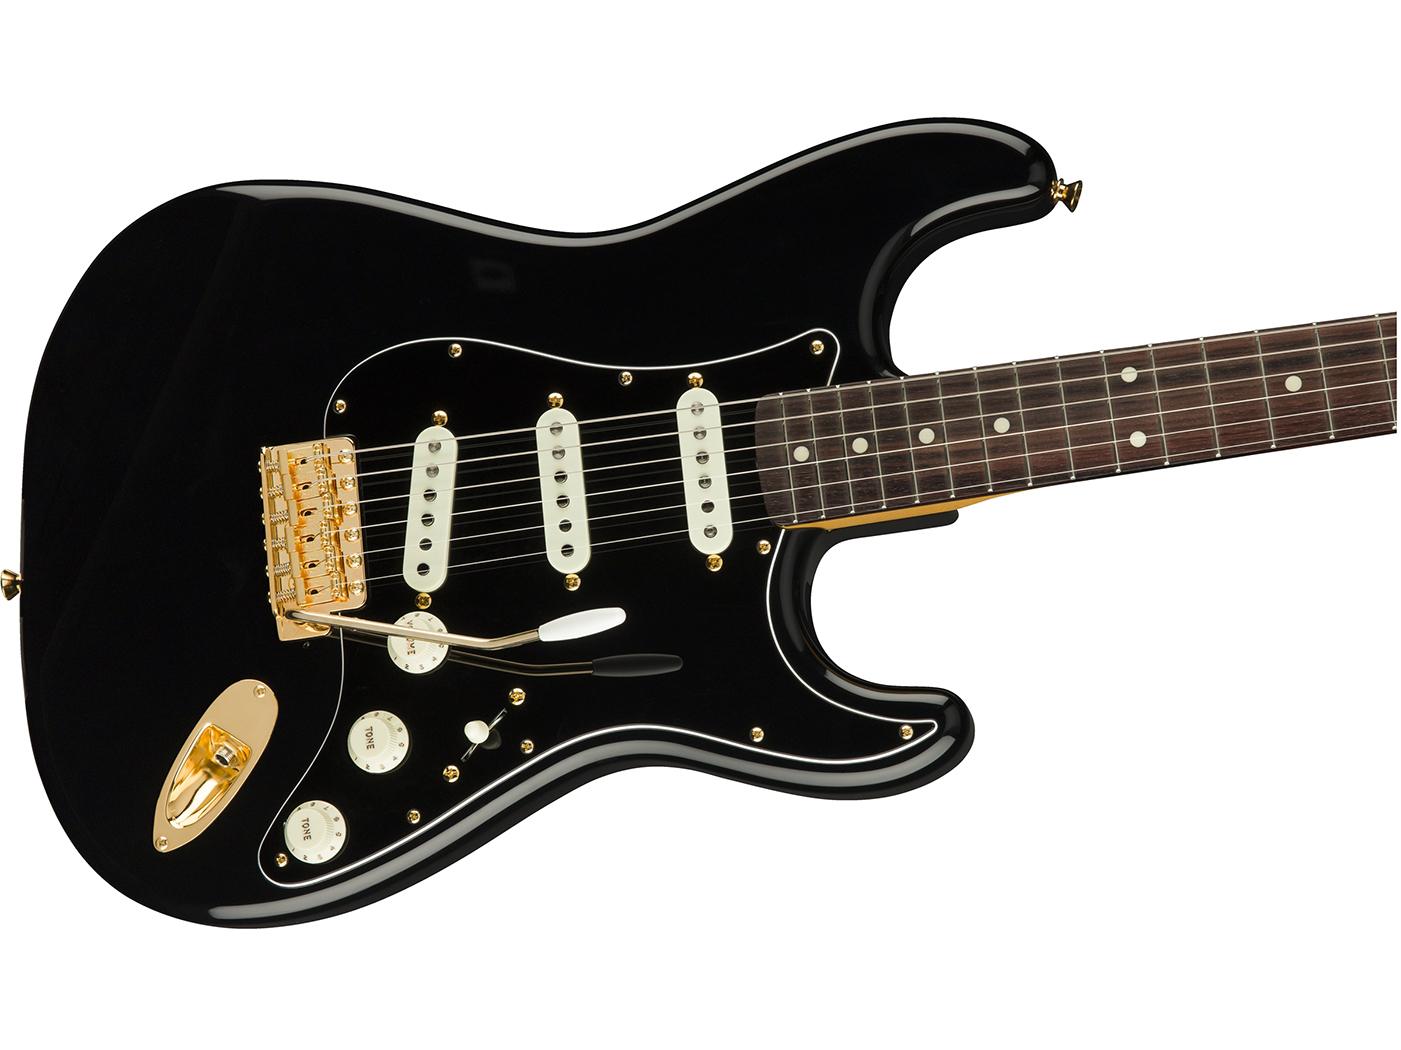 Fender MIJ Midnight Traditional 60s series feature